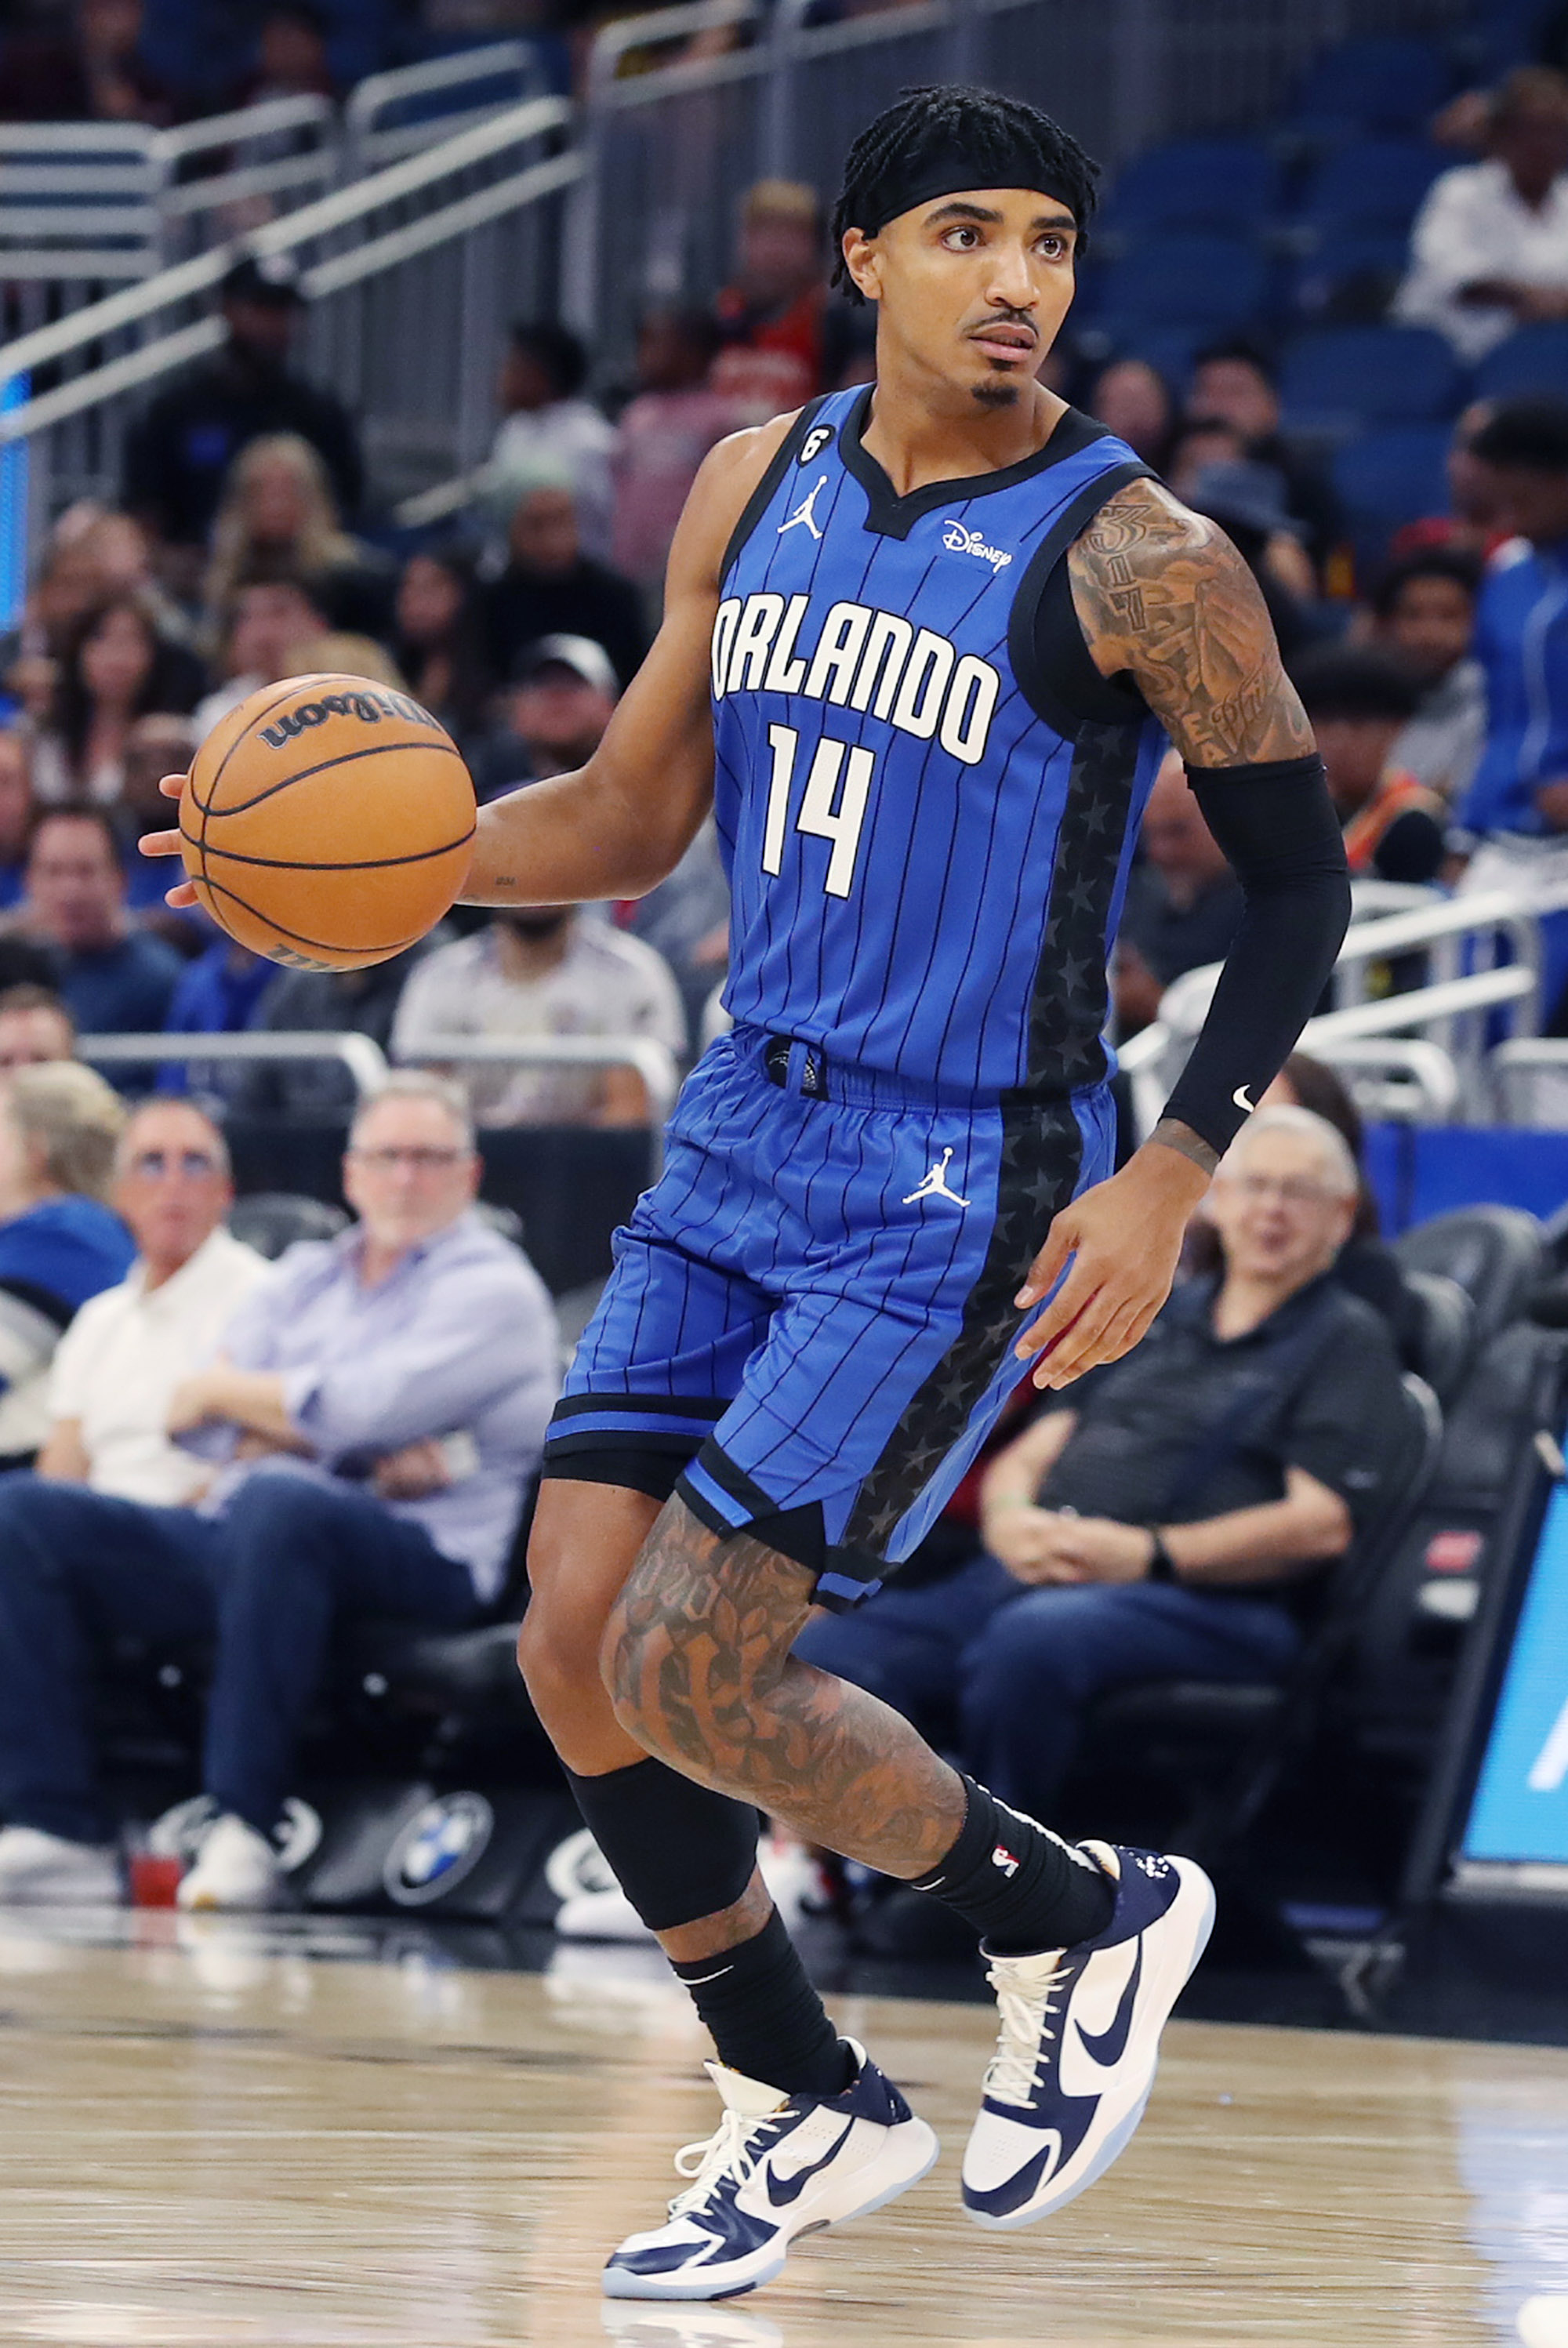 Gary Harris Injury Update: Latest on Orlando Magic guard's availability for Game 6 (May 3) - Gary Harris's Return Possibilities